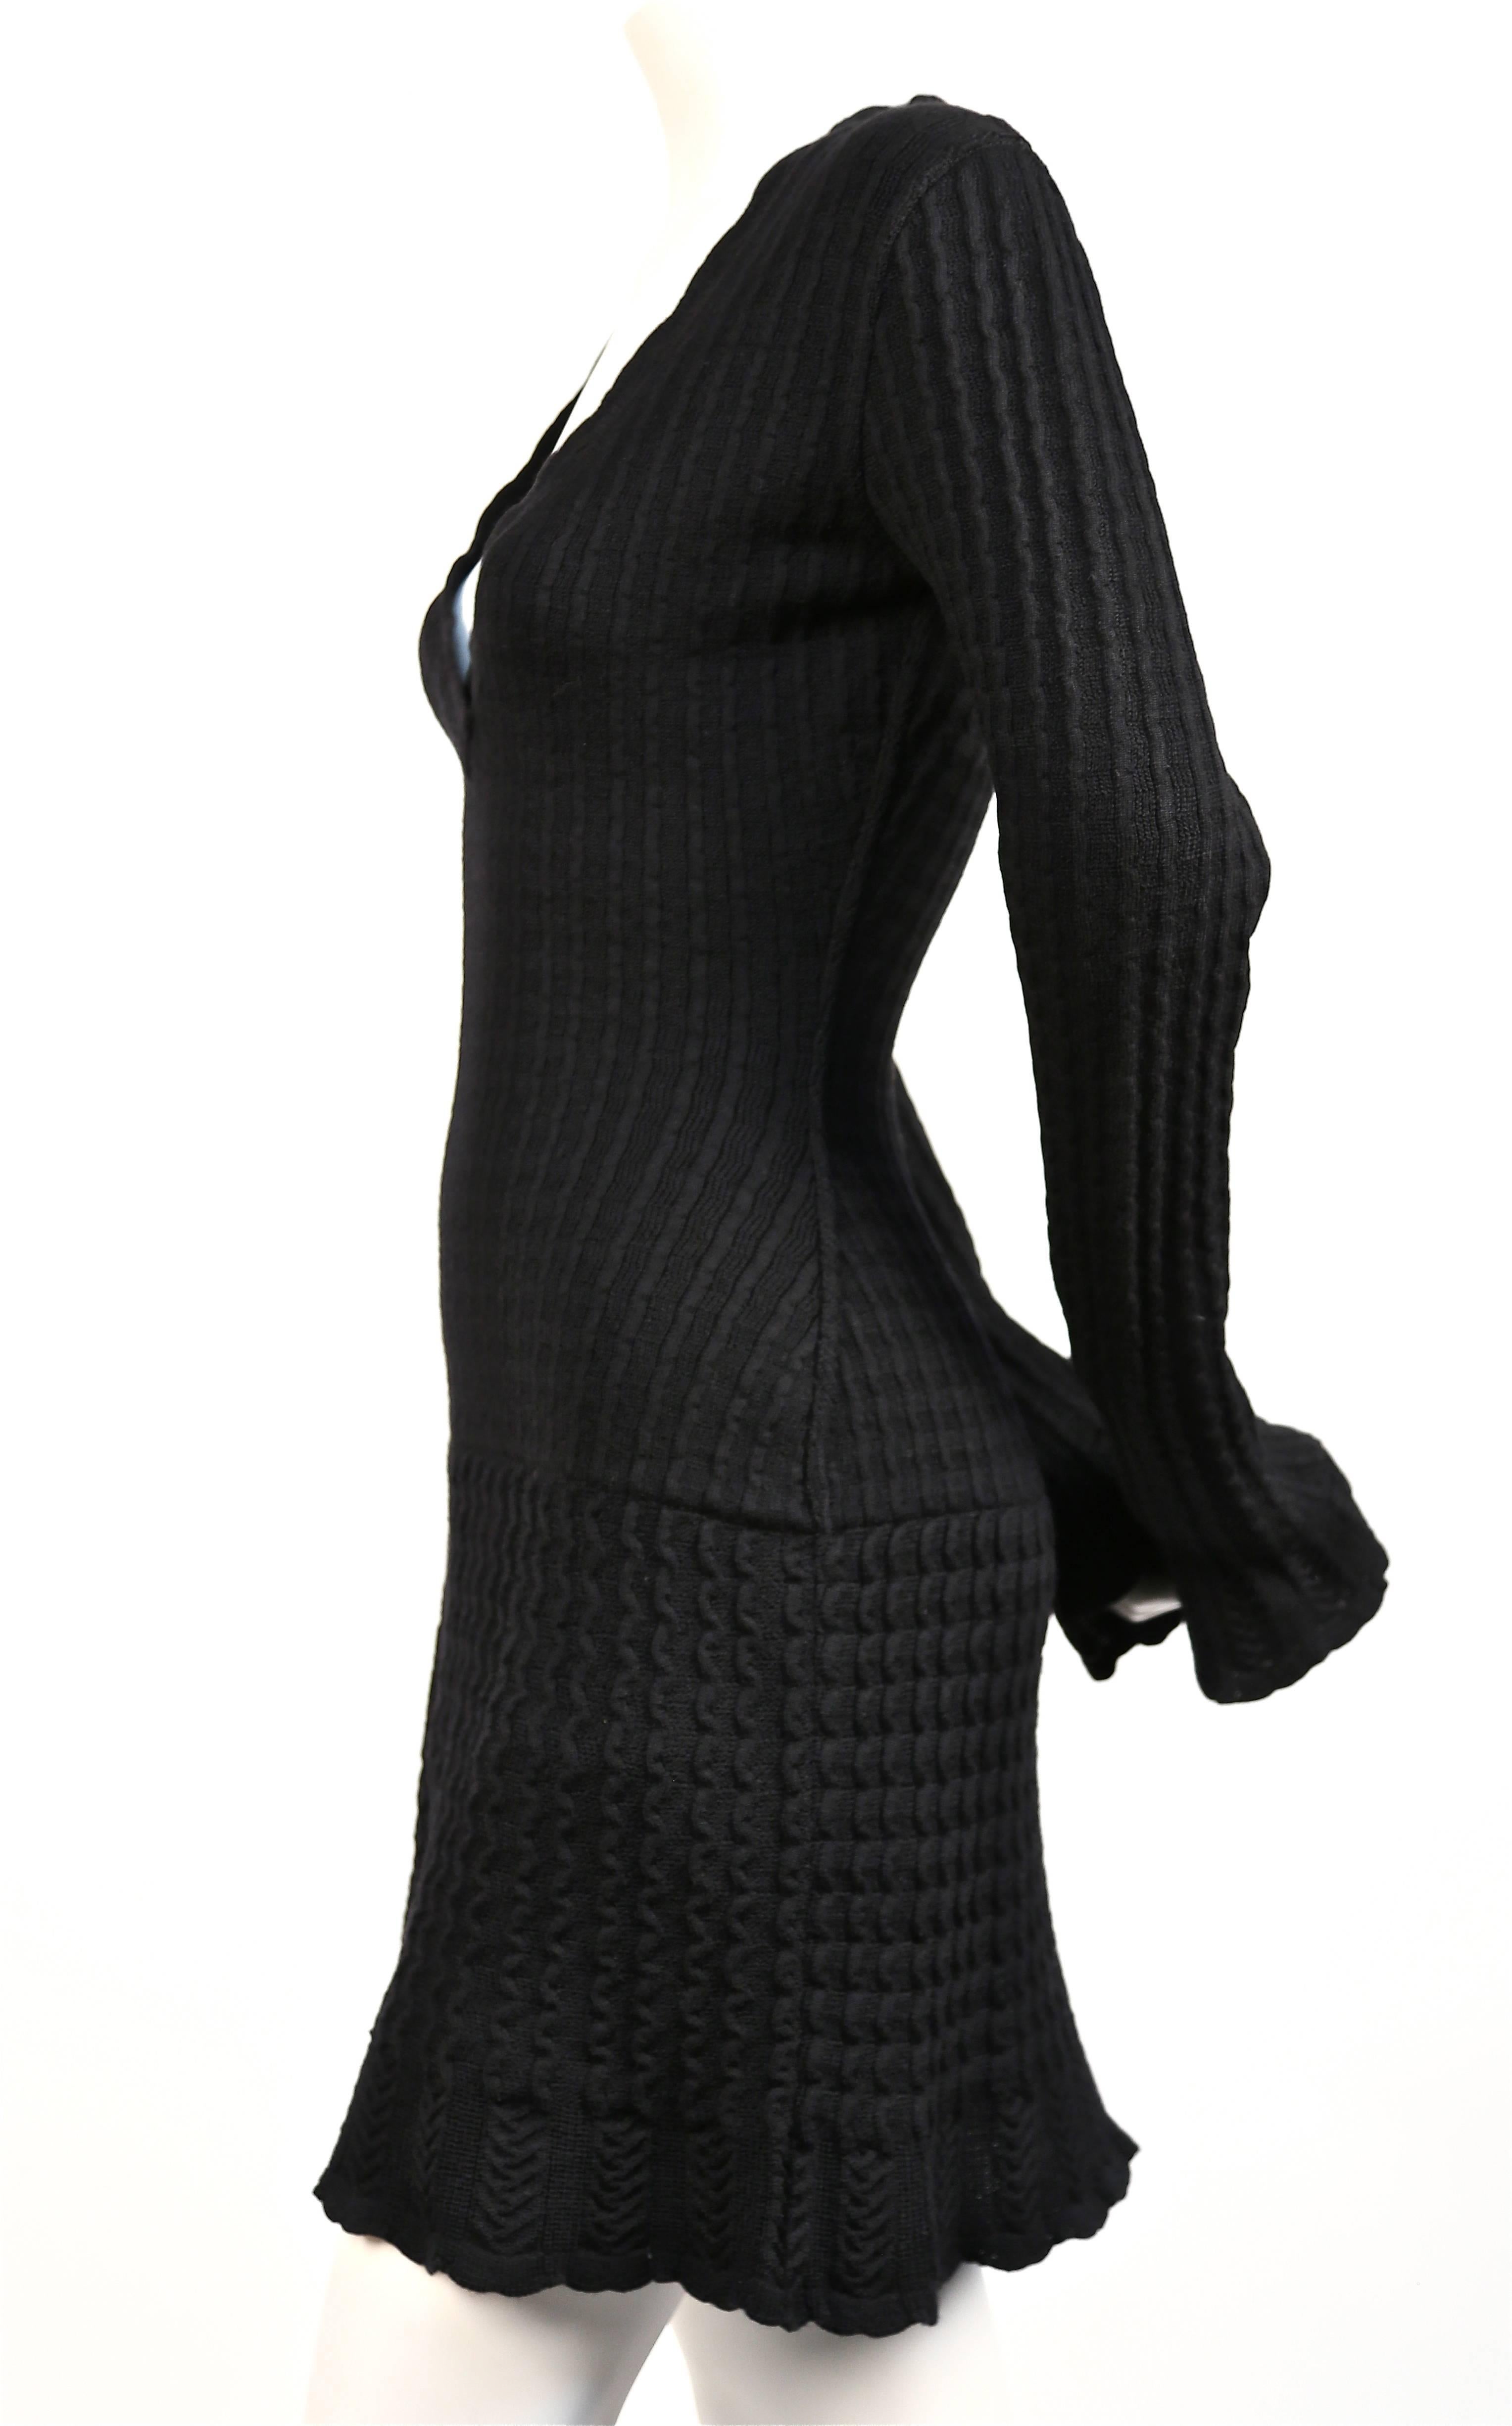 Classic jet black knit wool dress with crocheted detail from Alaia dating to the 1990's. Size 'S'. Approximate measurements: bust 32